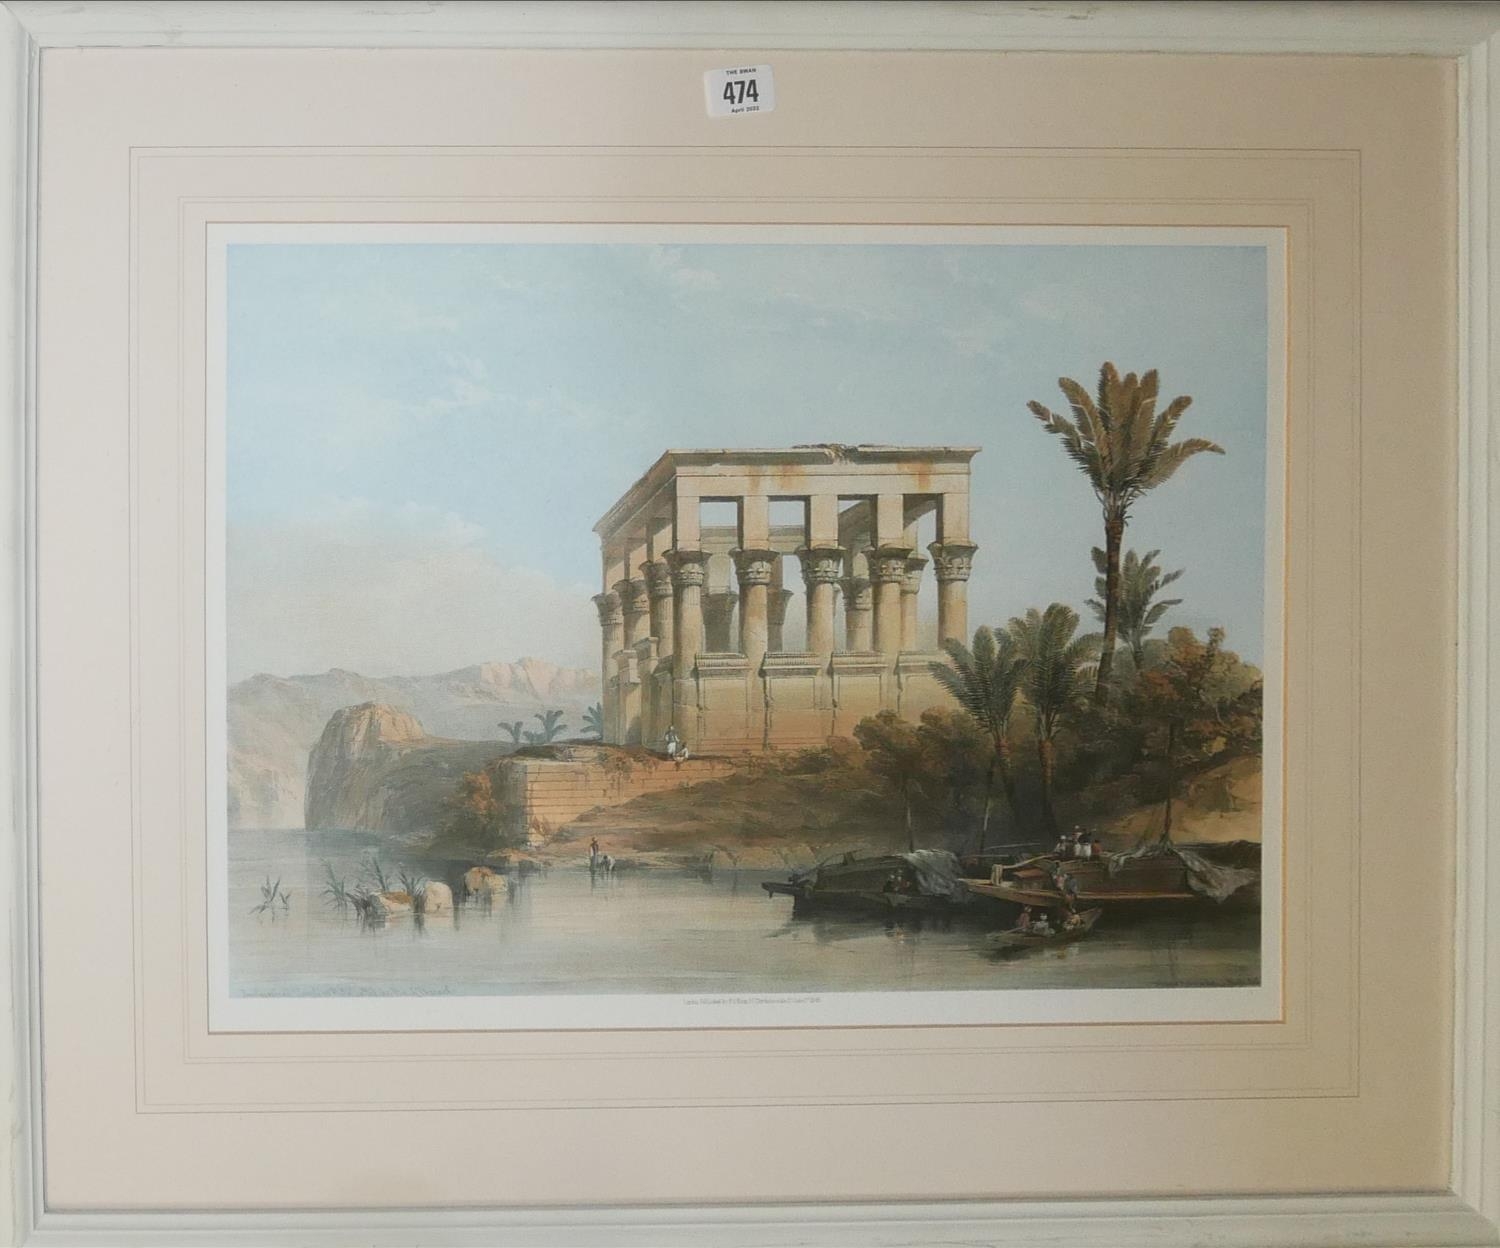 THREE DAVID ROBERTS, 1796 - 1864, COLOURED PRINTS Middle Eastern scenes, 20th Century, mounted, - Image 2 of 6